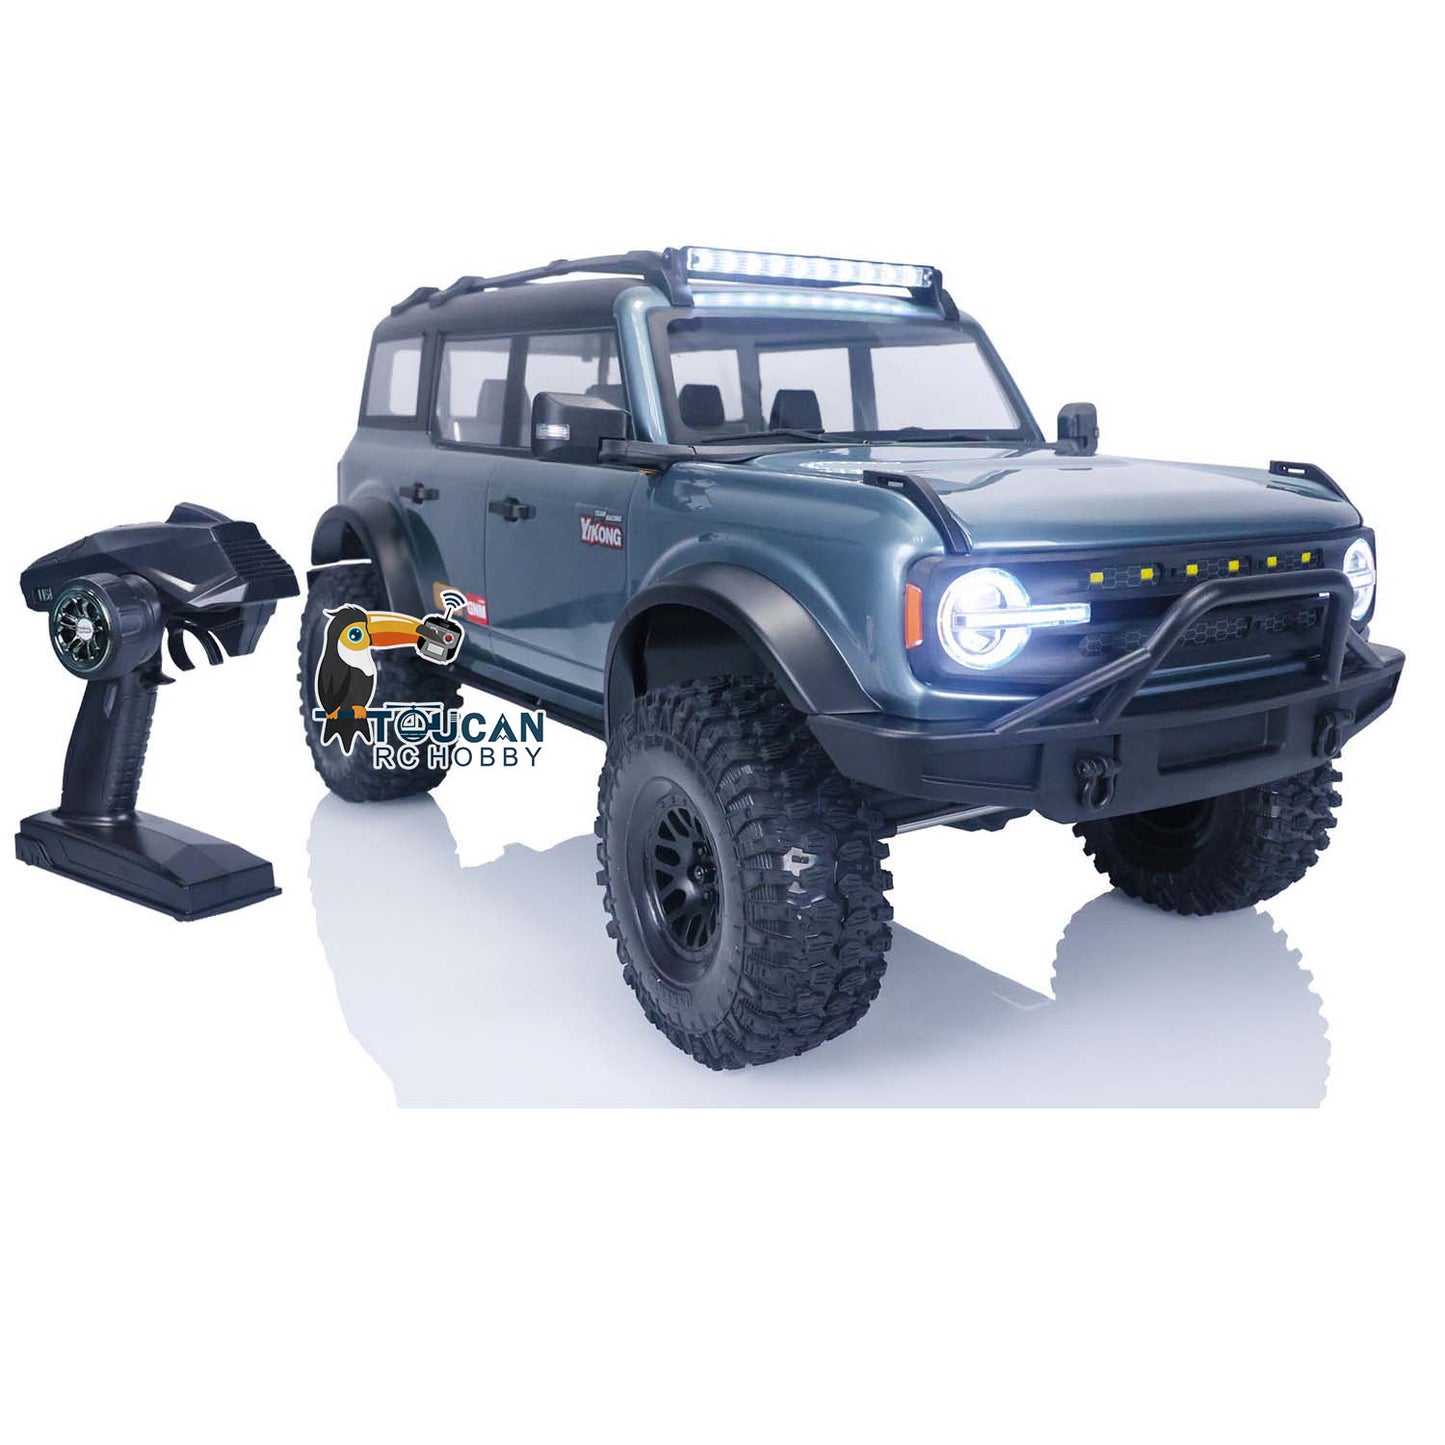 IN STOCK YIKONG YK4083 1/8 4WD RC Crawler Climbing Car Radio Controlled Off-road Vehicles Painted Assembled Hobby Model ESC Motor